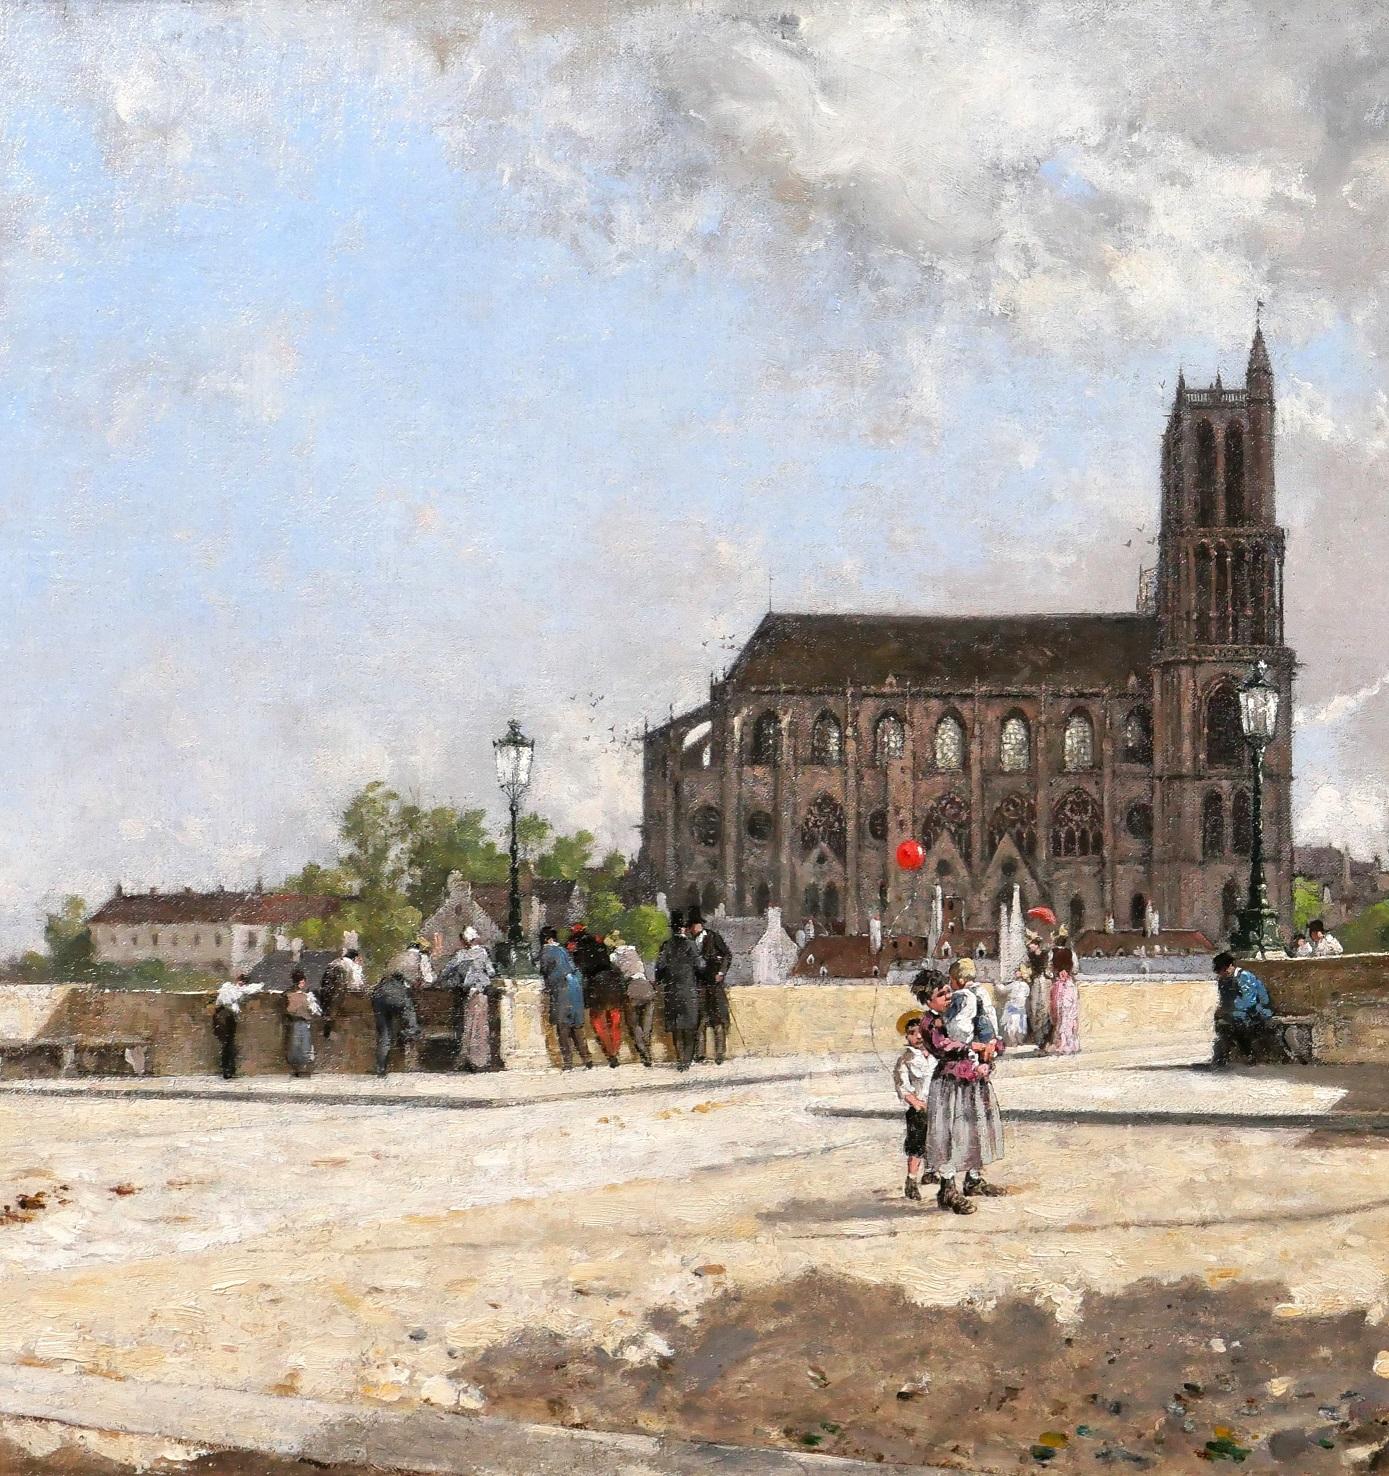 Alfred CHATAUD
1833-1908
The red ball, landscape with the cathedral of Mantes-la-Jolie (France)
Painting, oil on canvas
Signed
Painting: 54 x 39 cm (21.3 x 15.3 inches)
Beautiful 19th century frame: 76 x 63.5 cm (29.9 x 25 inches)
Very good